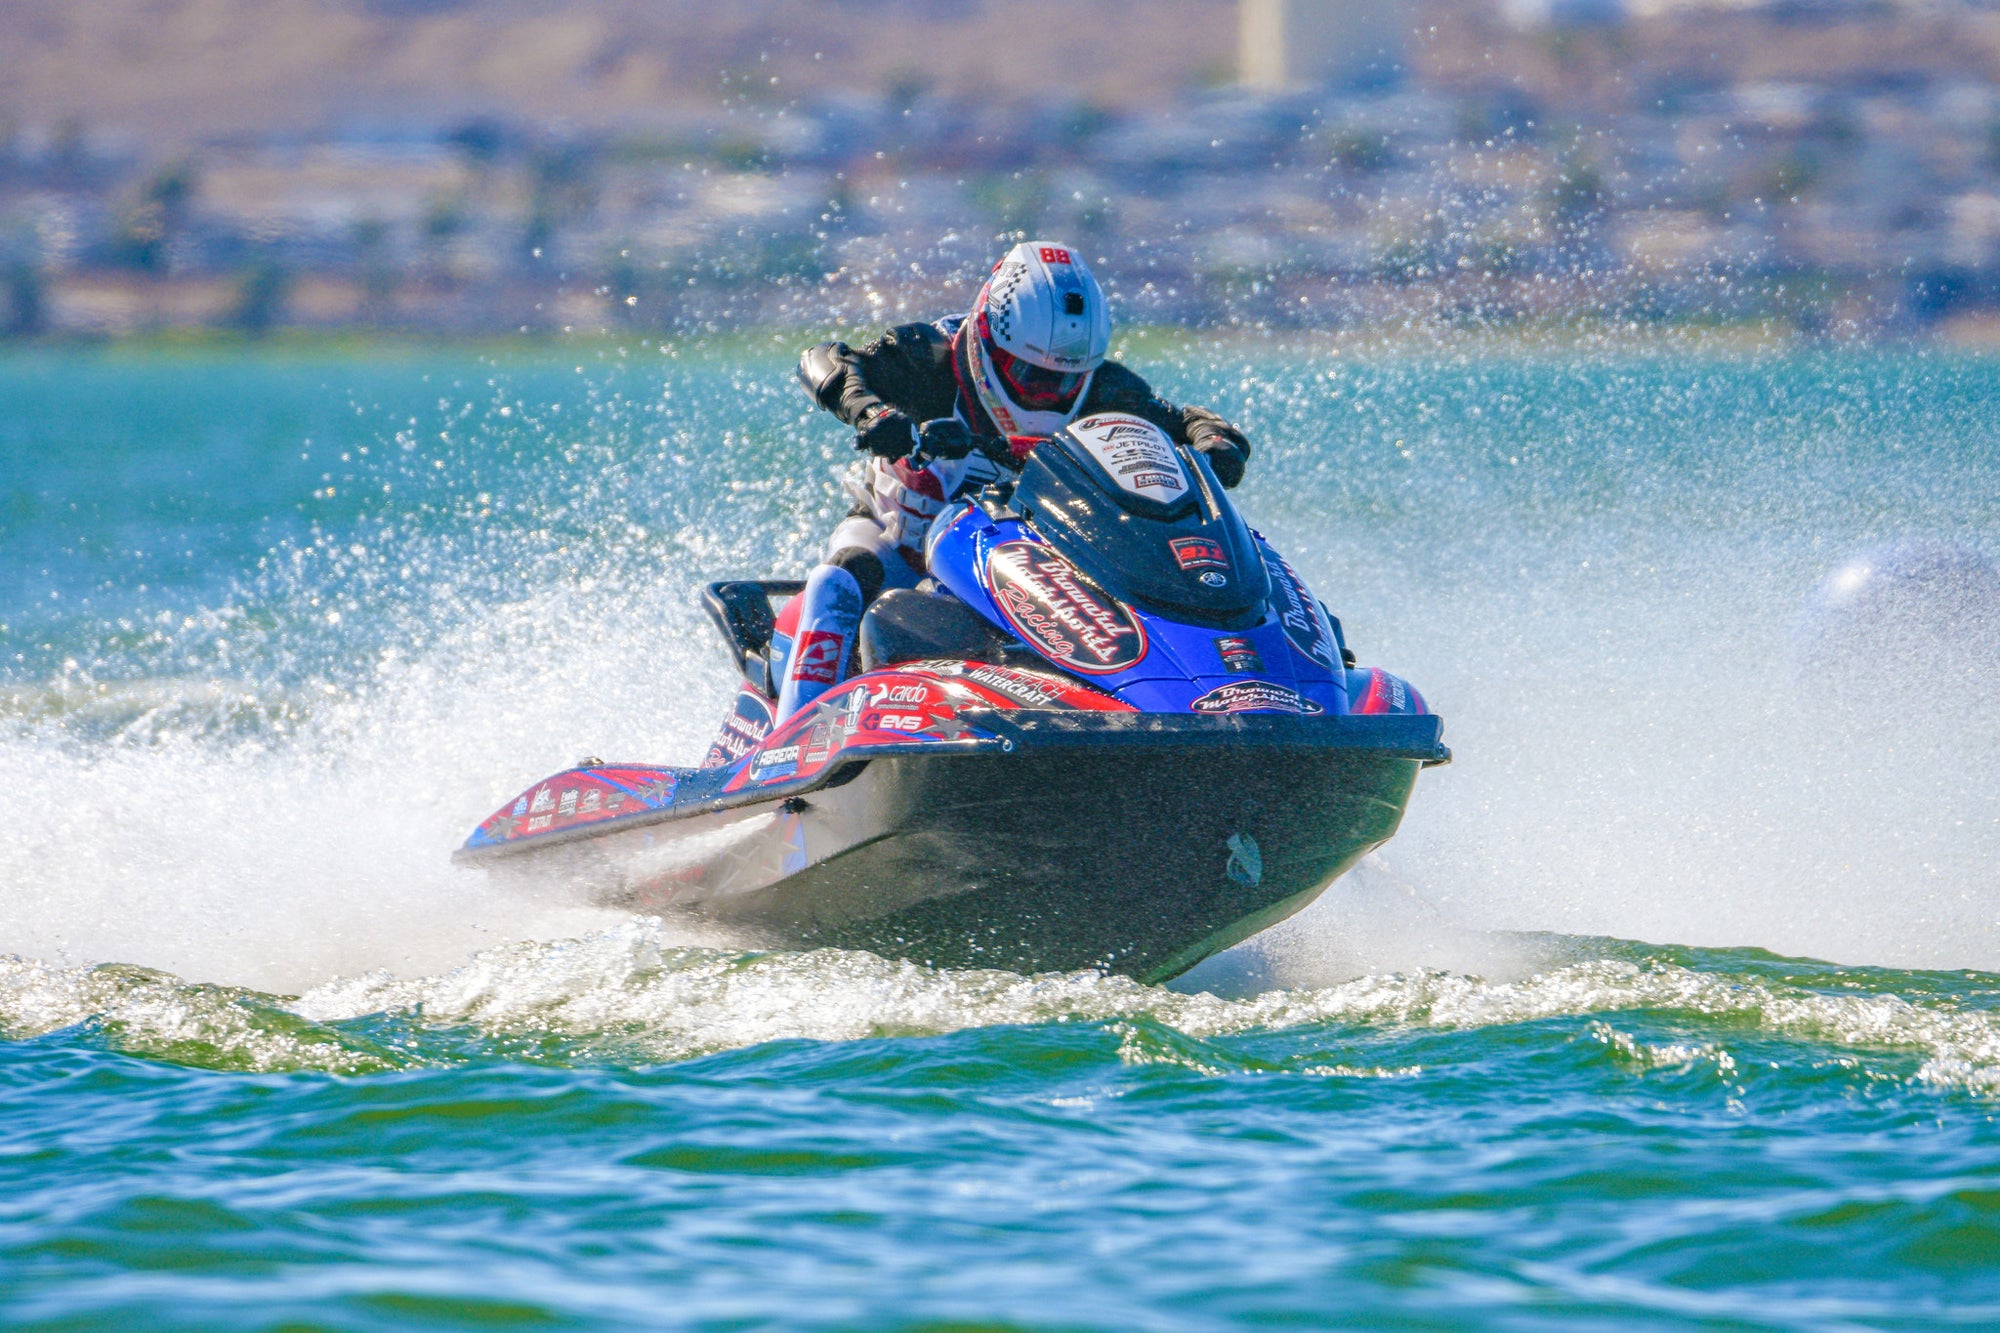 Watercraft Racer Arnold Martinez: Fit and Fast at Age 57